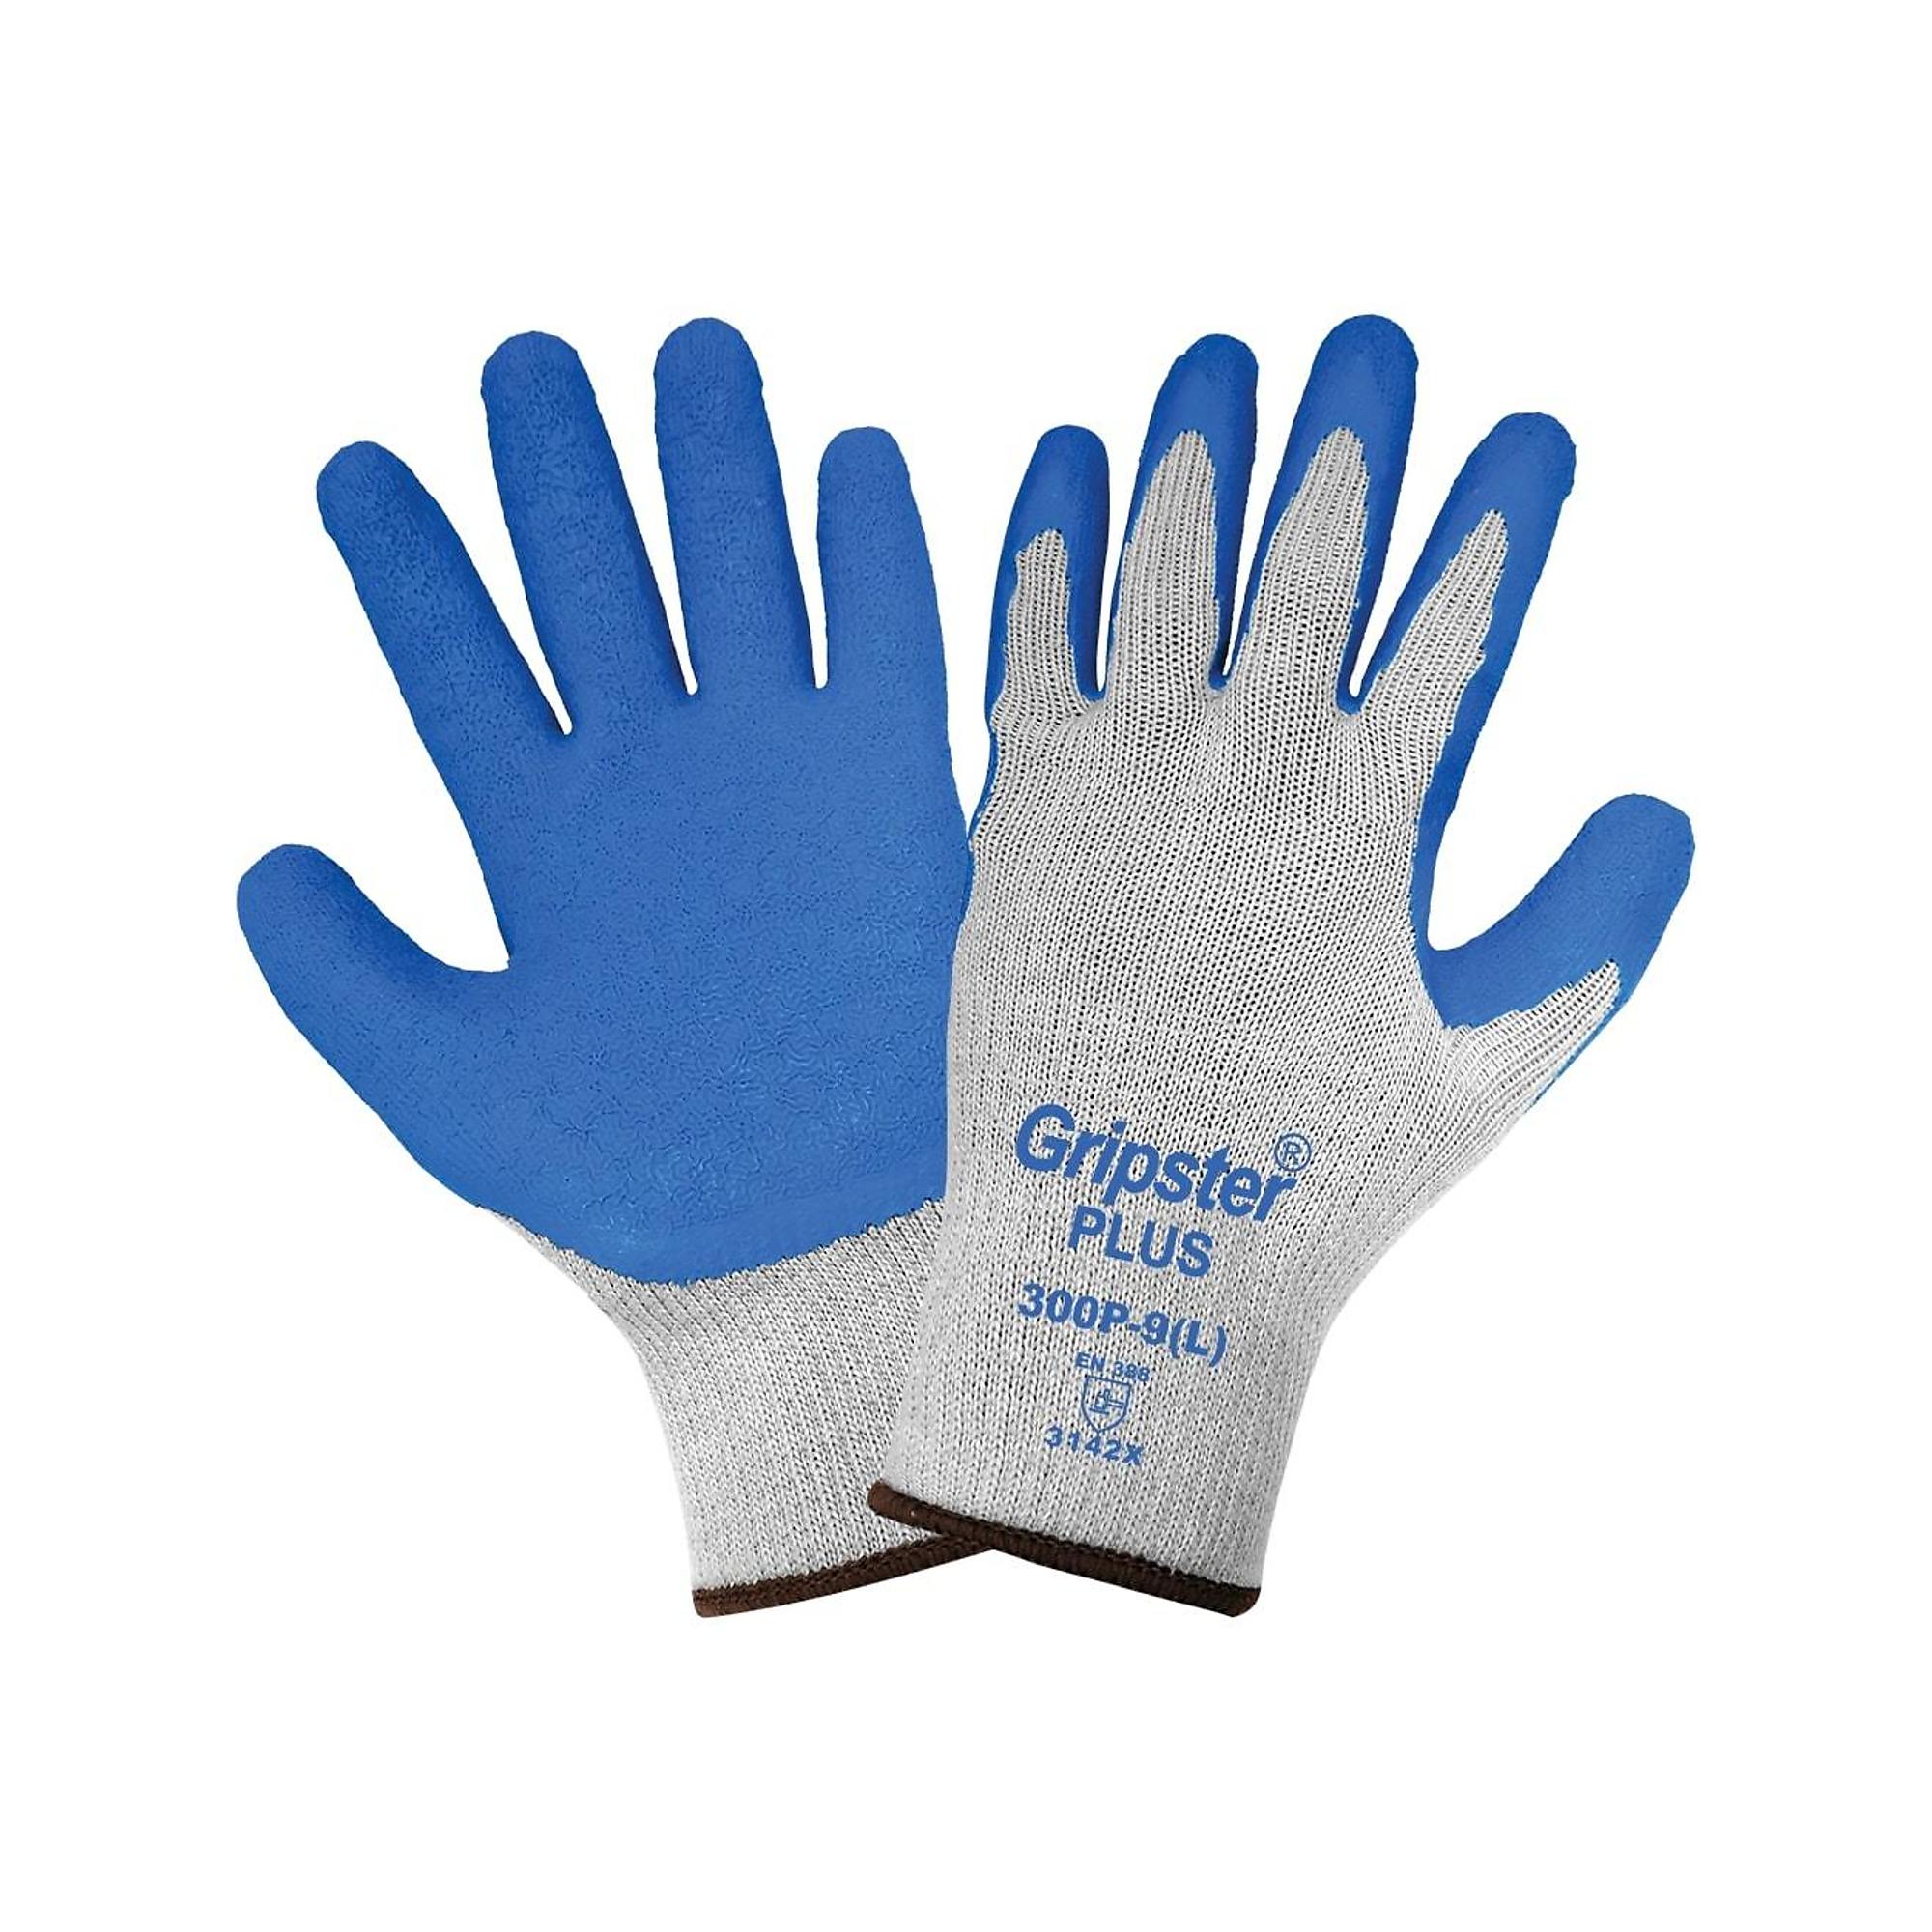 Global Glove Gripster , Gray, Blue Rubber Palm, Cut Resistant A2 Gloves - 12 Pairs, Size S, Color Gray/Blue, Included (qty.) 12 Model 300P-7(S)